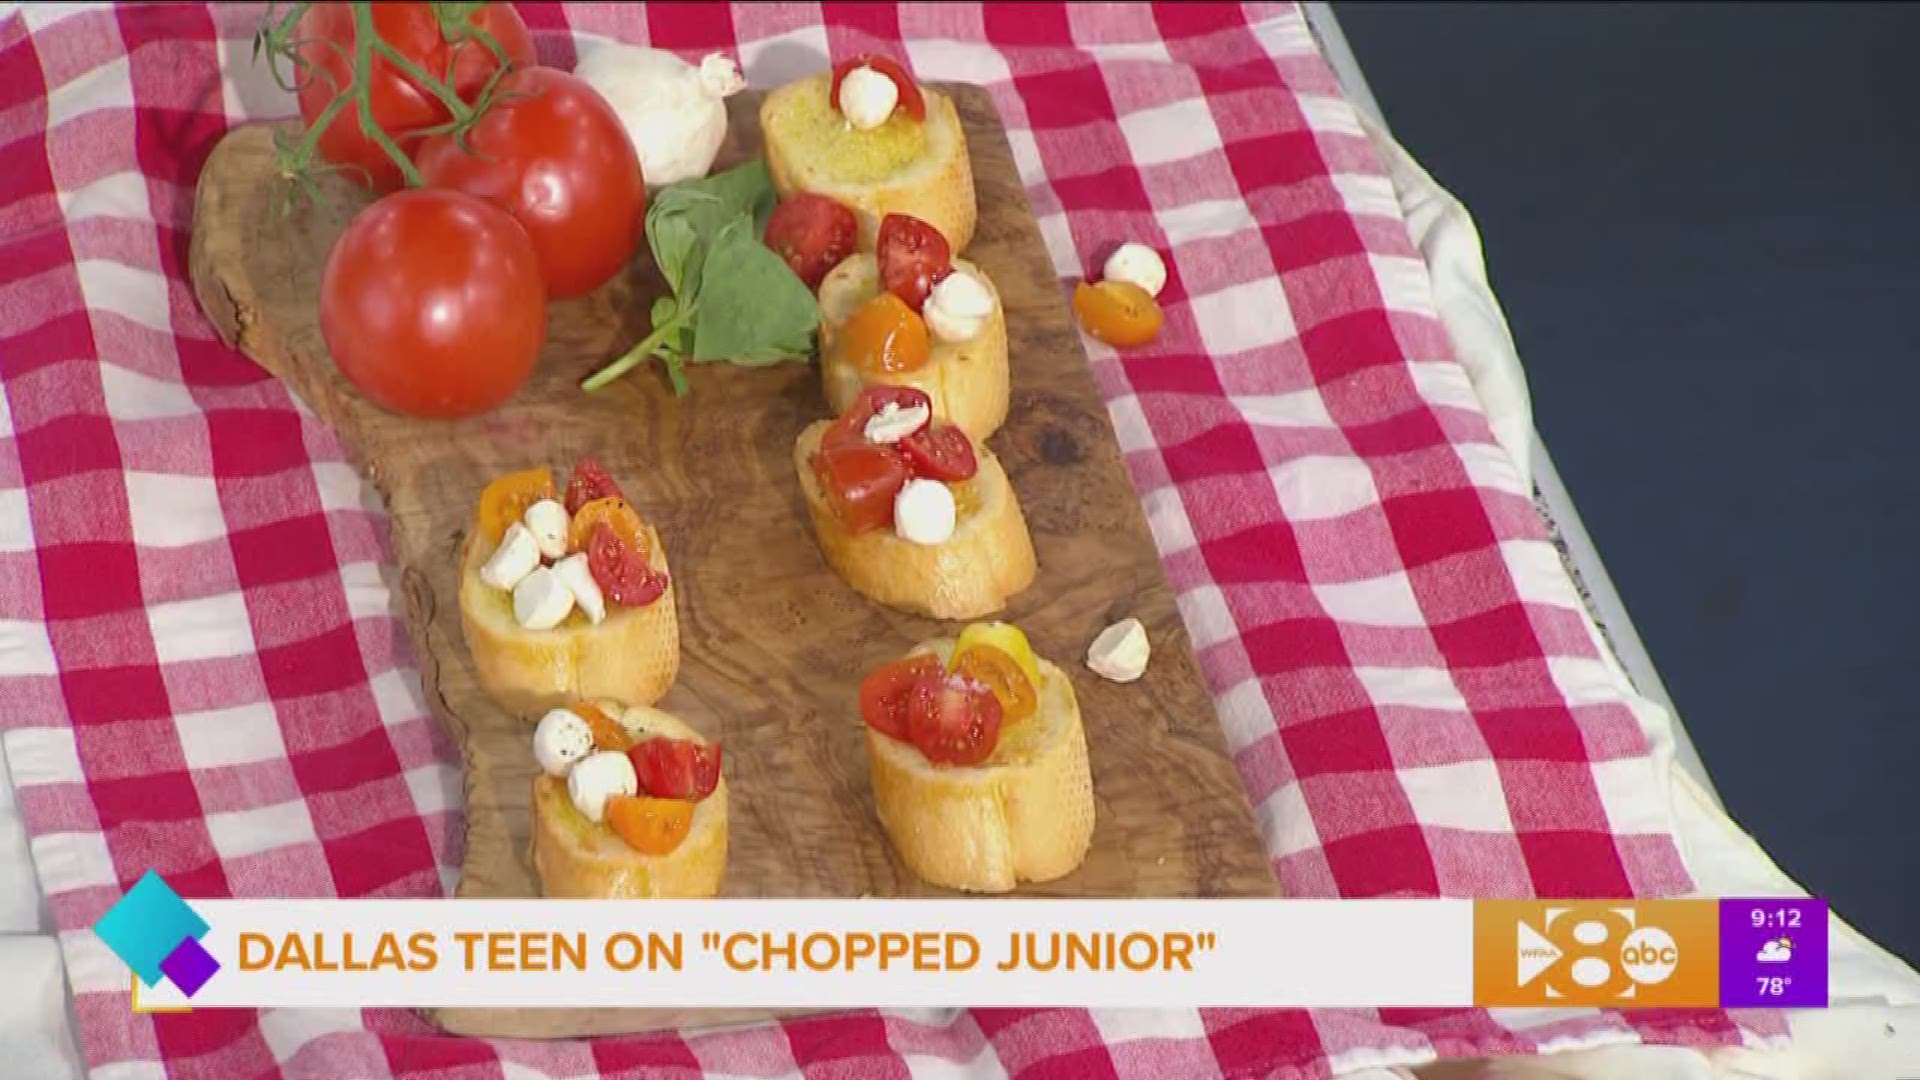 Catch Ava's episode of "Chopped Junior" on Food Network July 23rd at 8 p.m.